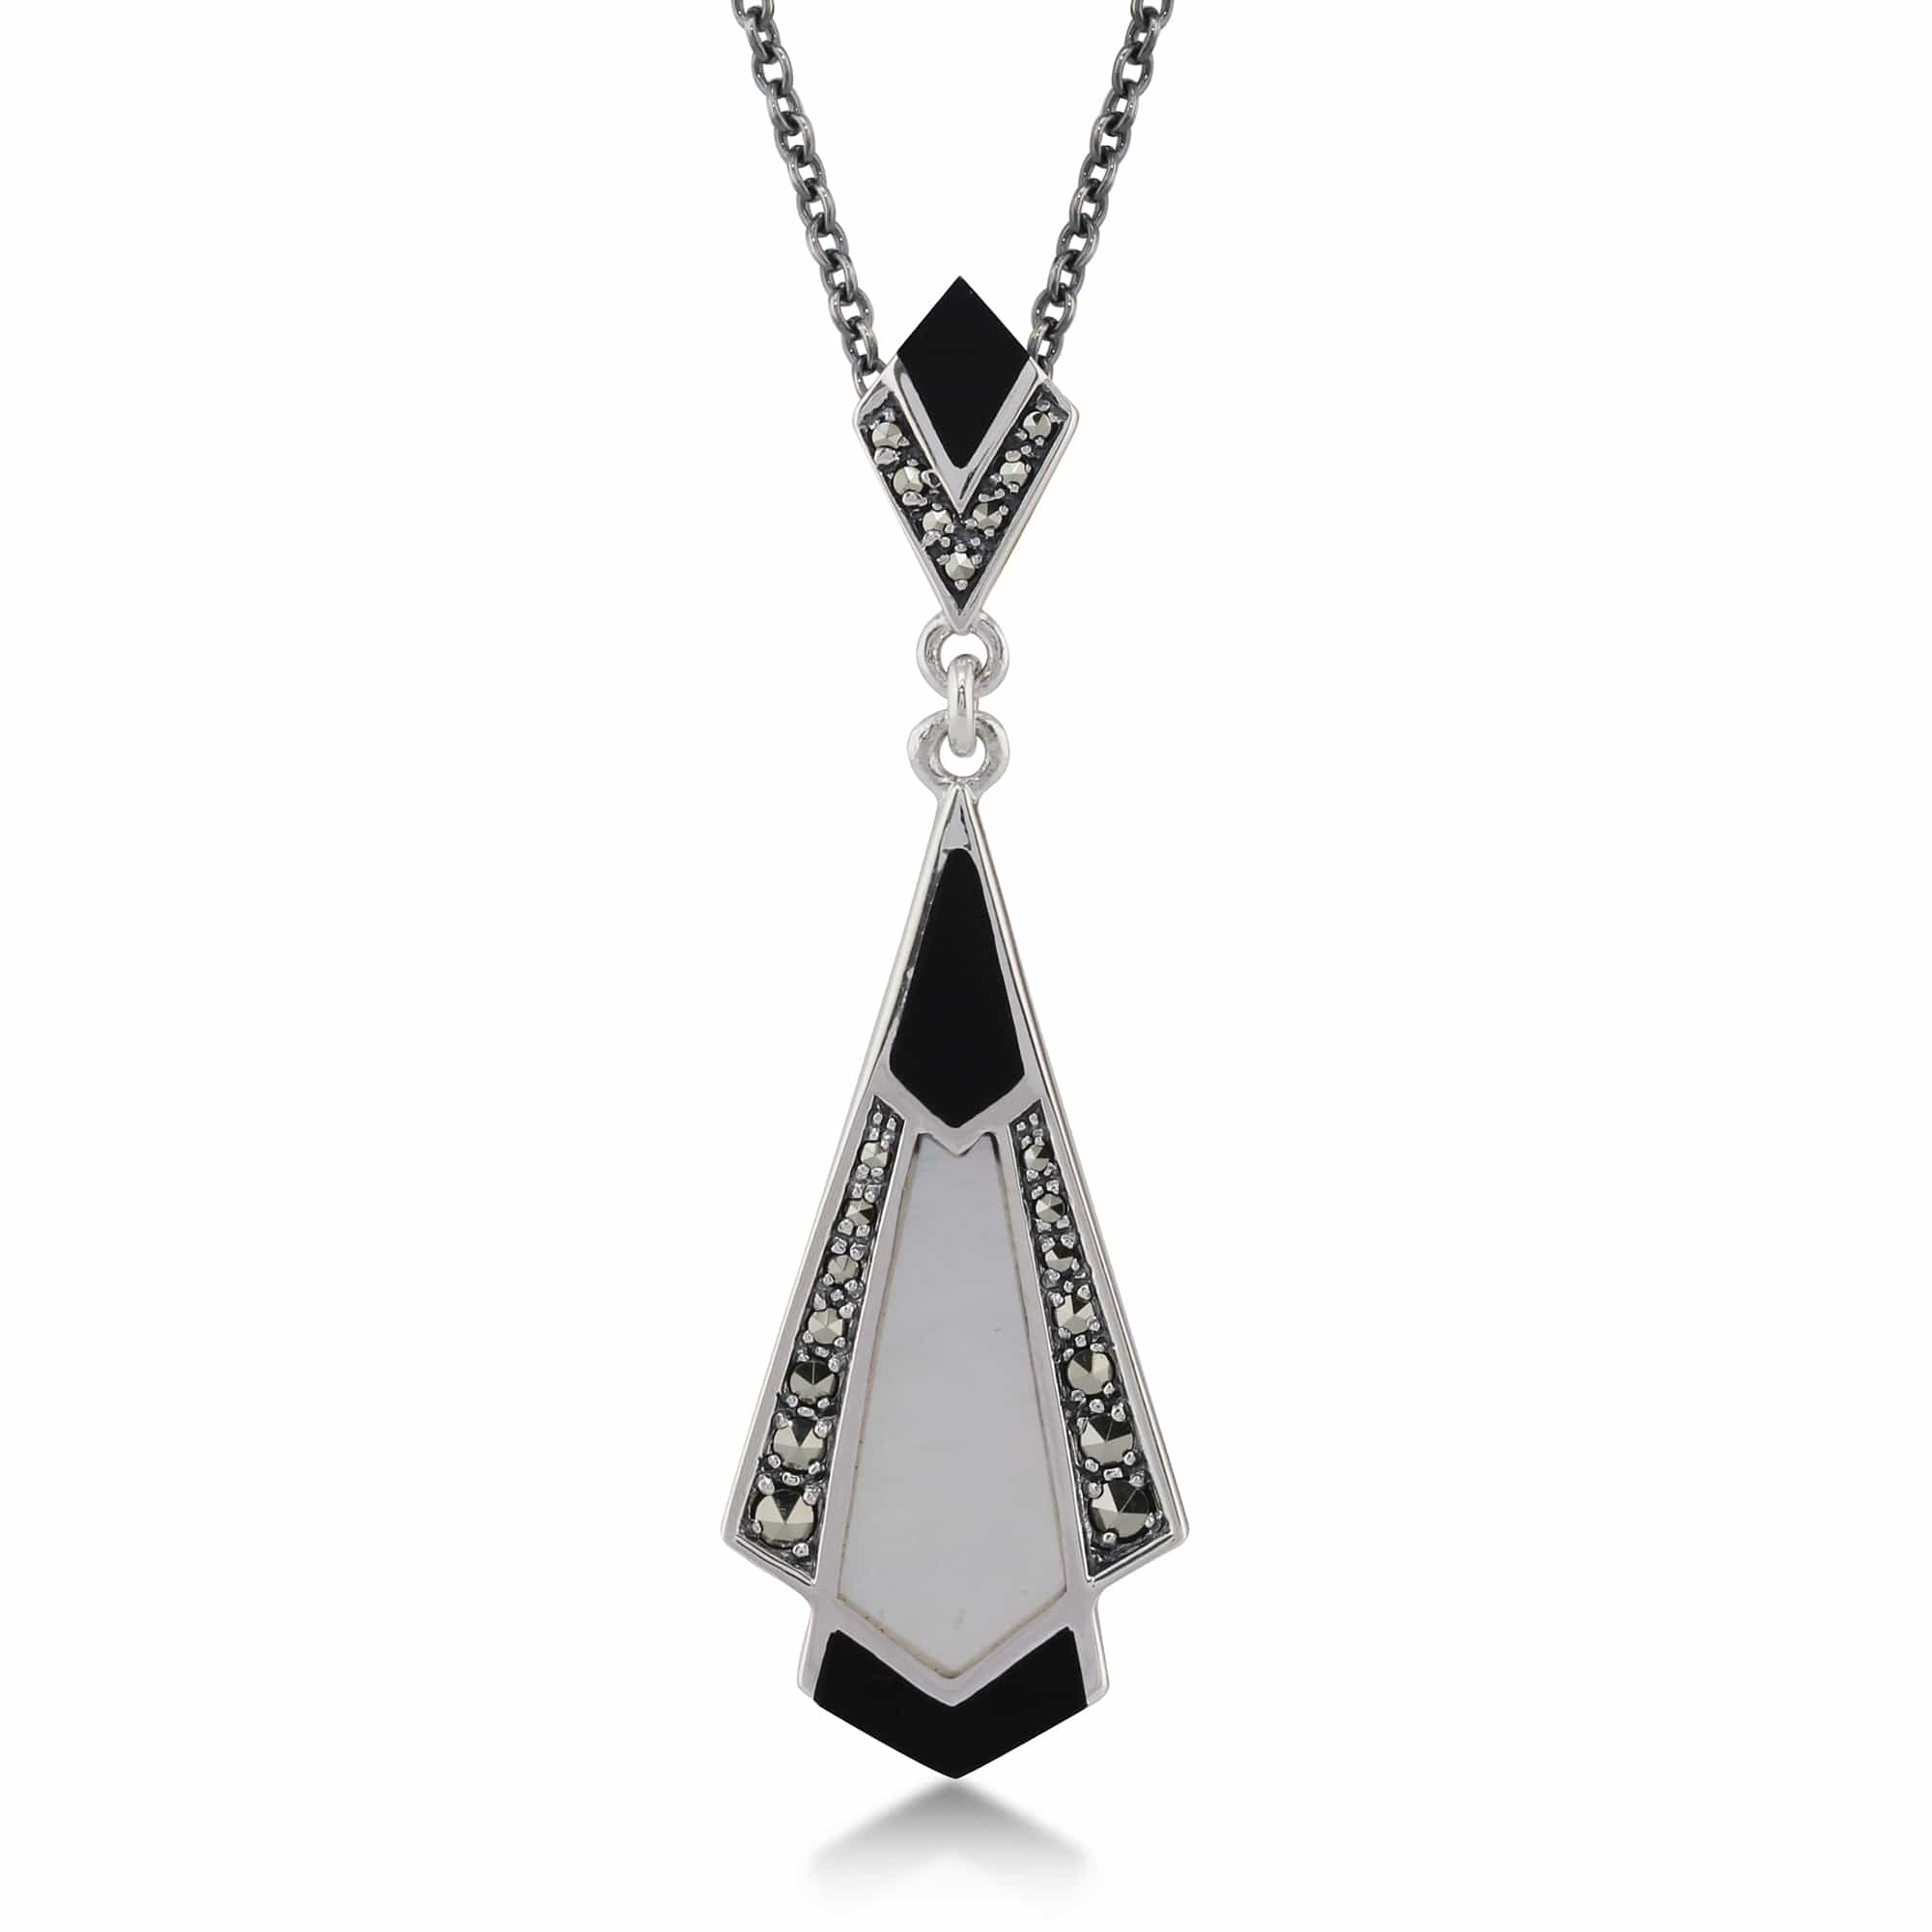 Art Deco Style Cabochon Black Onyx, Mother of Pearl & Marcasite Pendant in 925 Sterling Silver - Gemondo